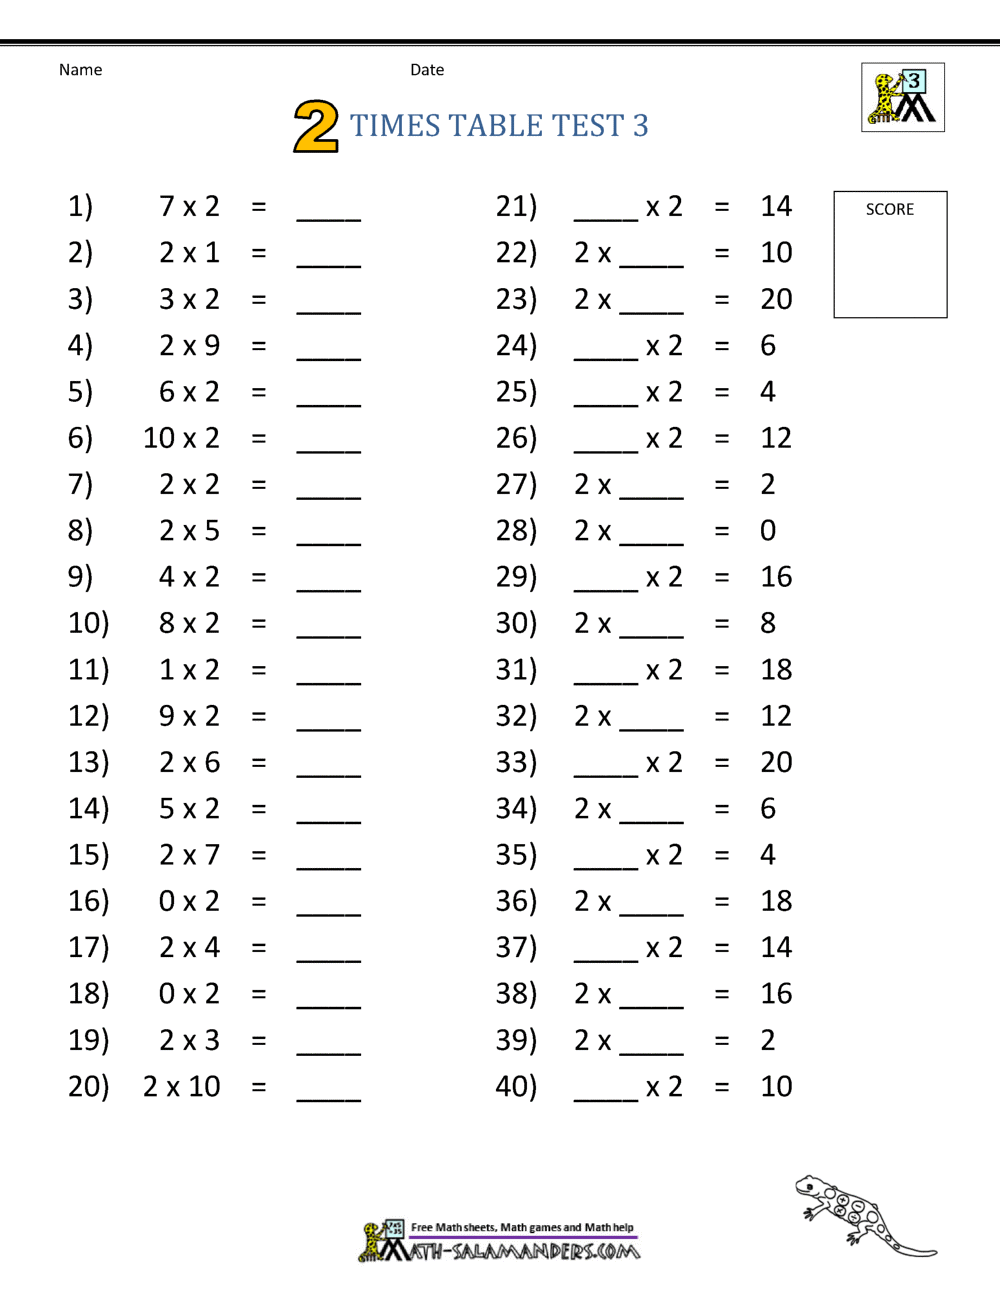 Times Table Tests - 20 20 20 20 20 Times Tables For 2 Times Table Worksheet